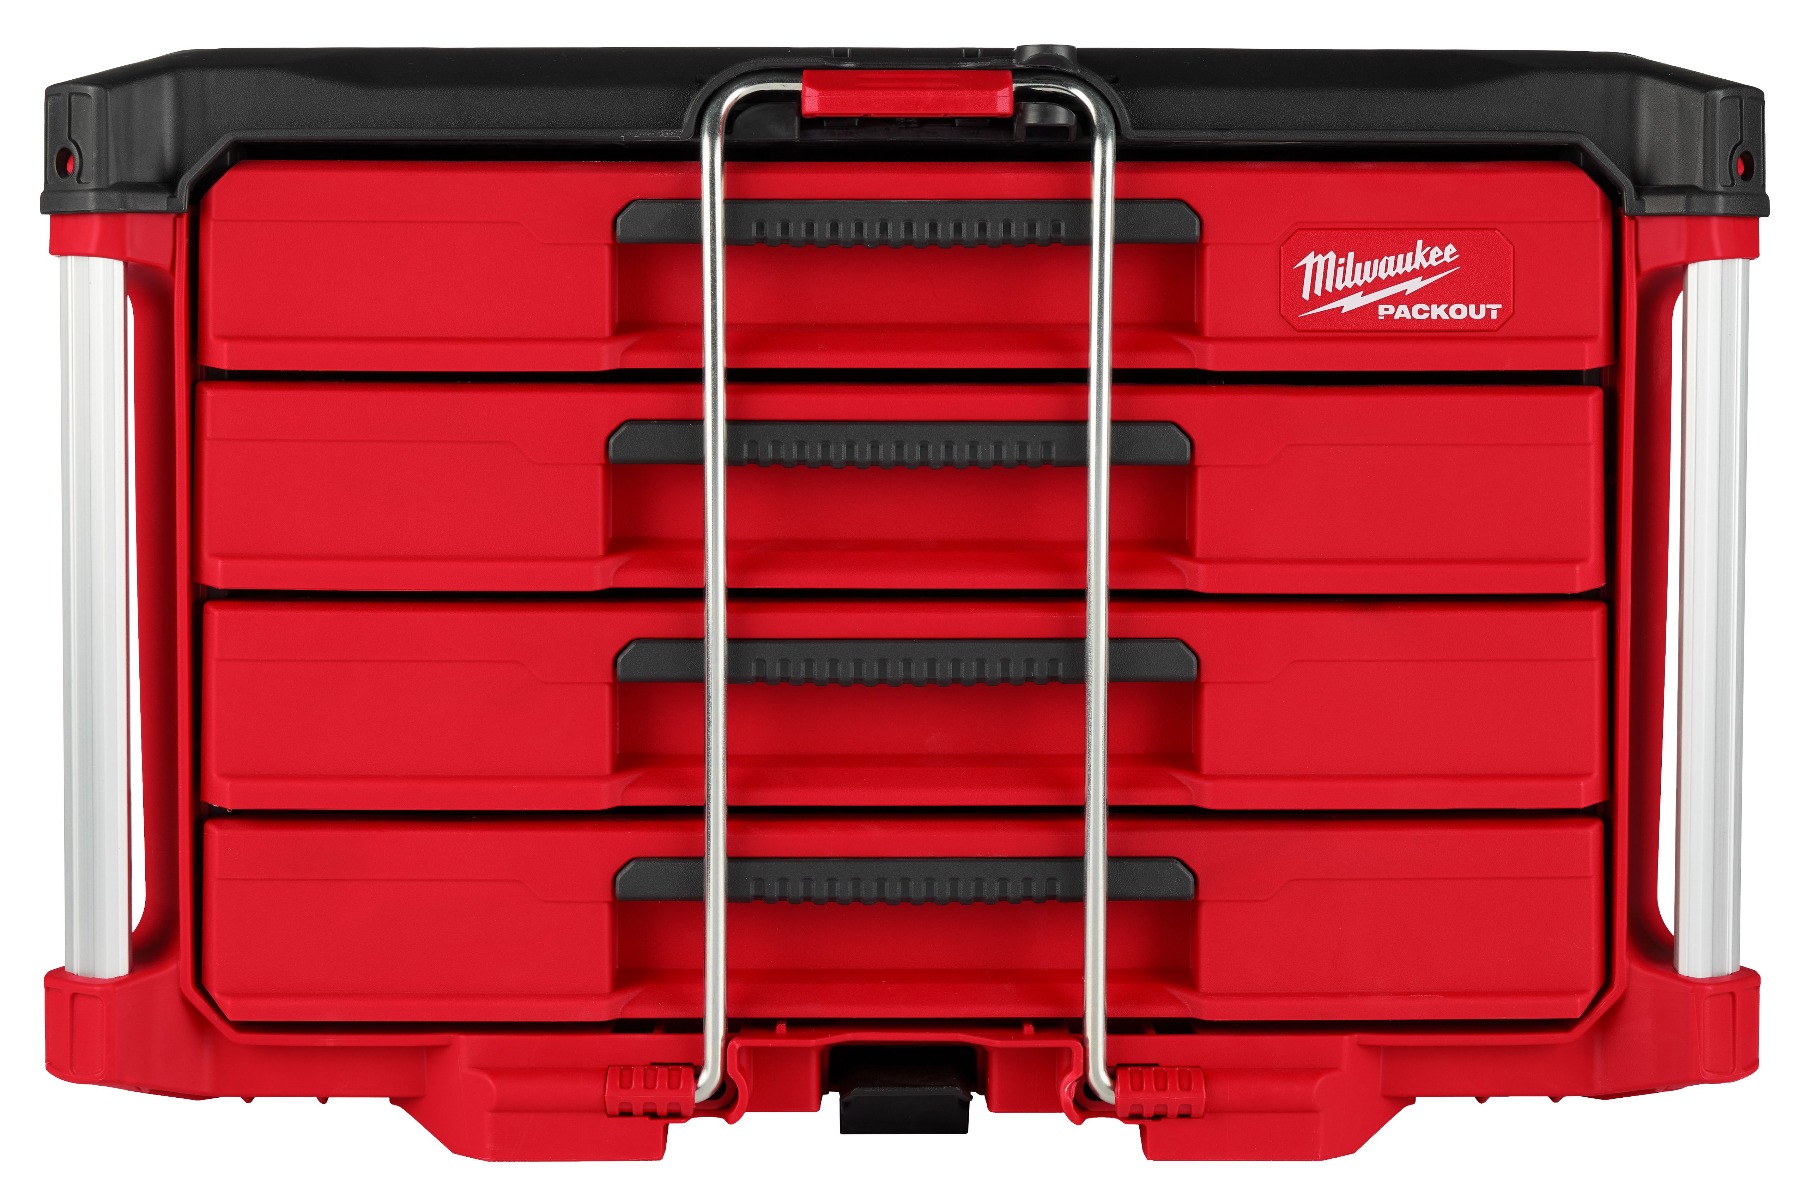 PACKOUT™ 4 Drawer Tool Box